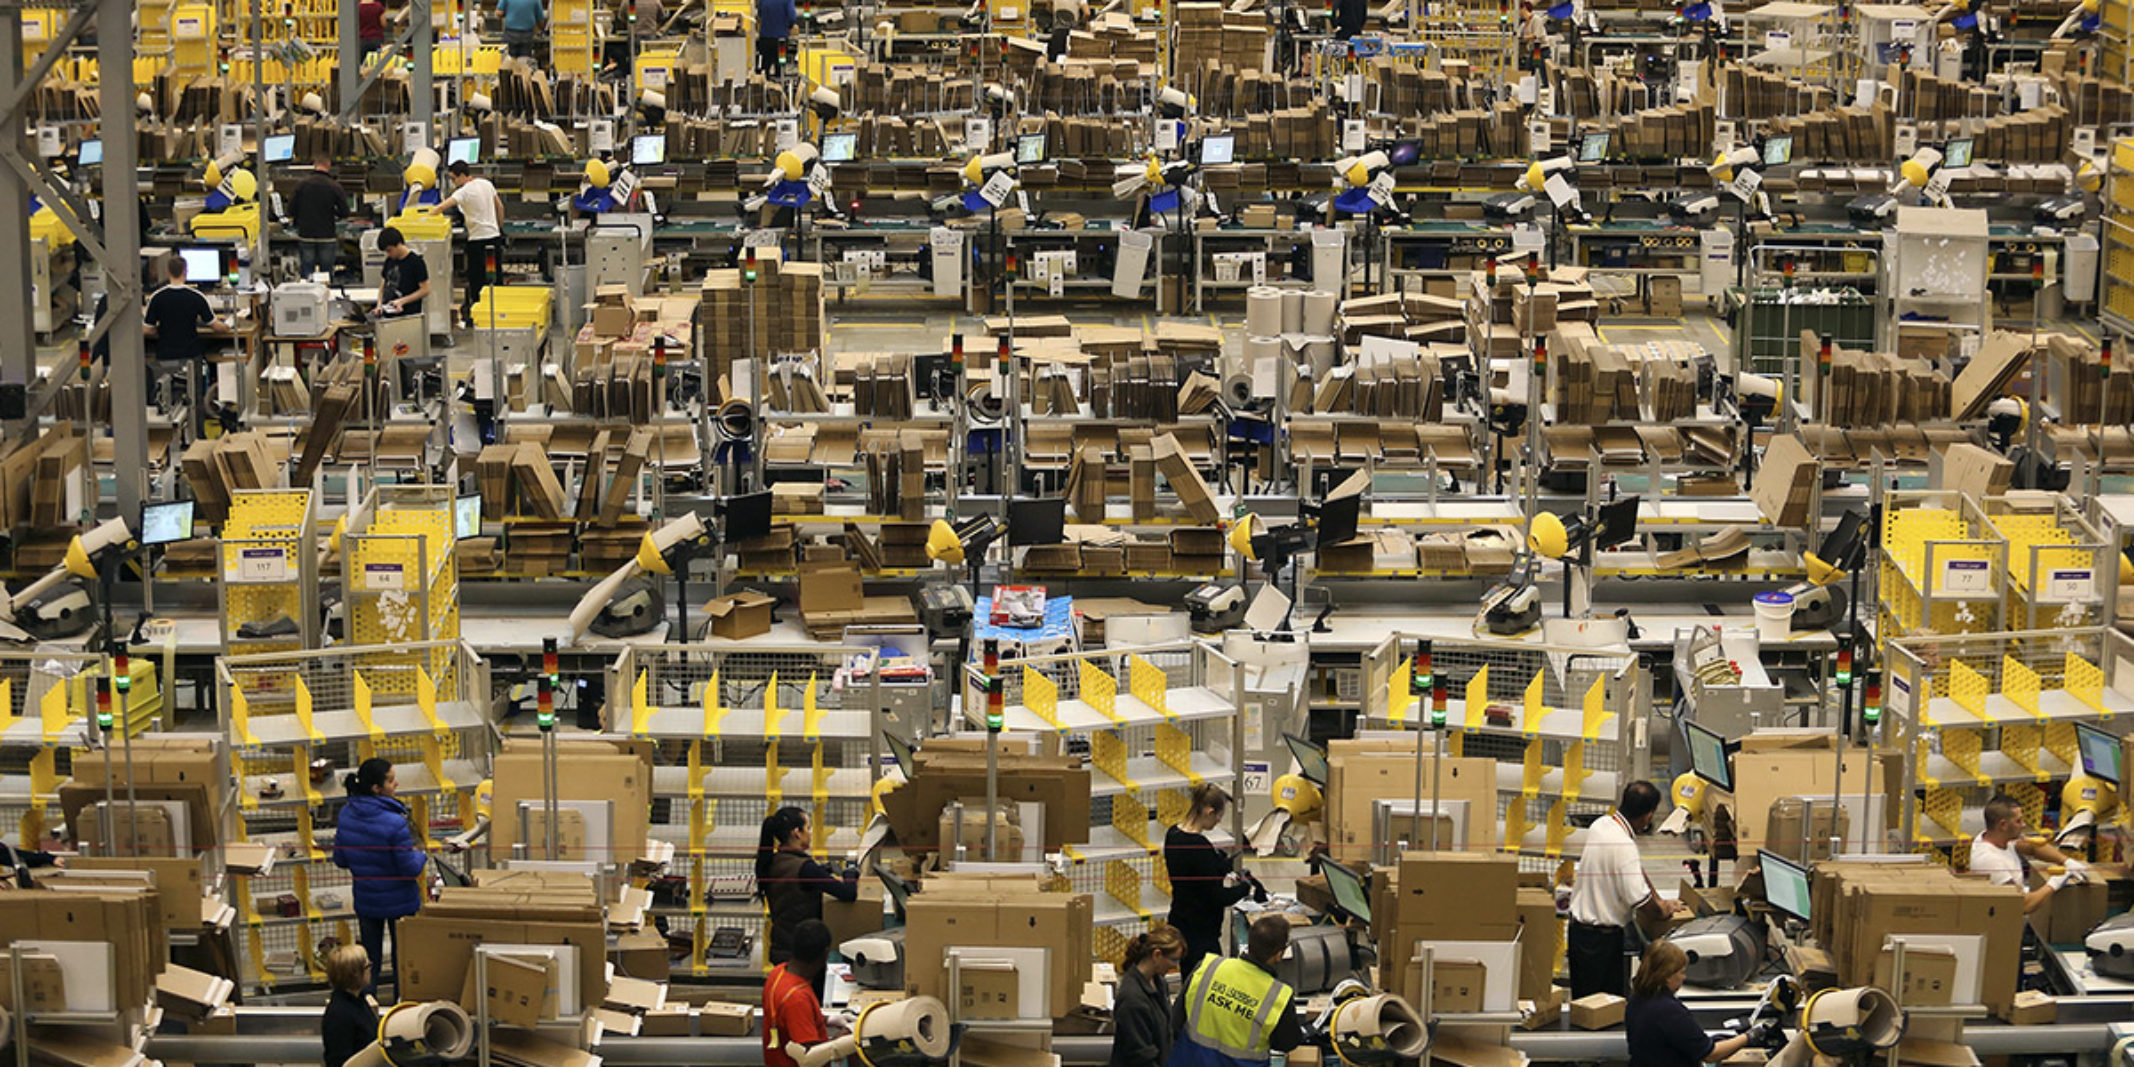 Image of a warehouse with people packing packages